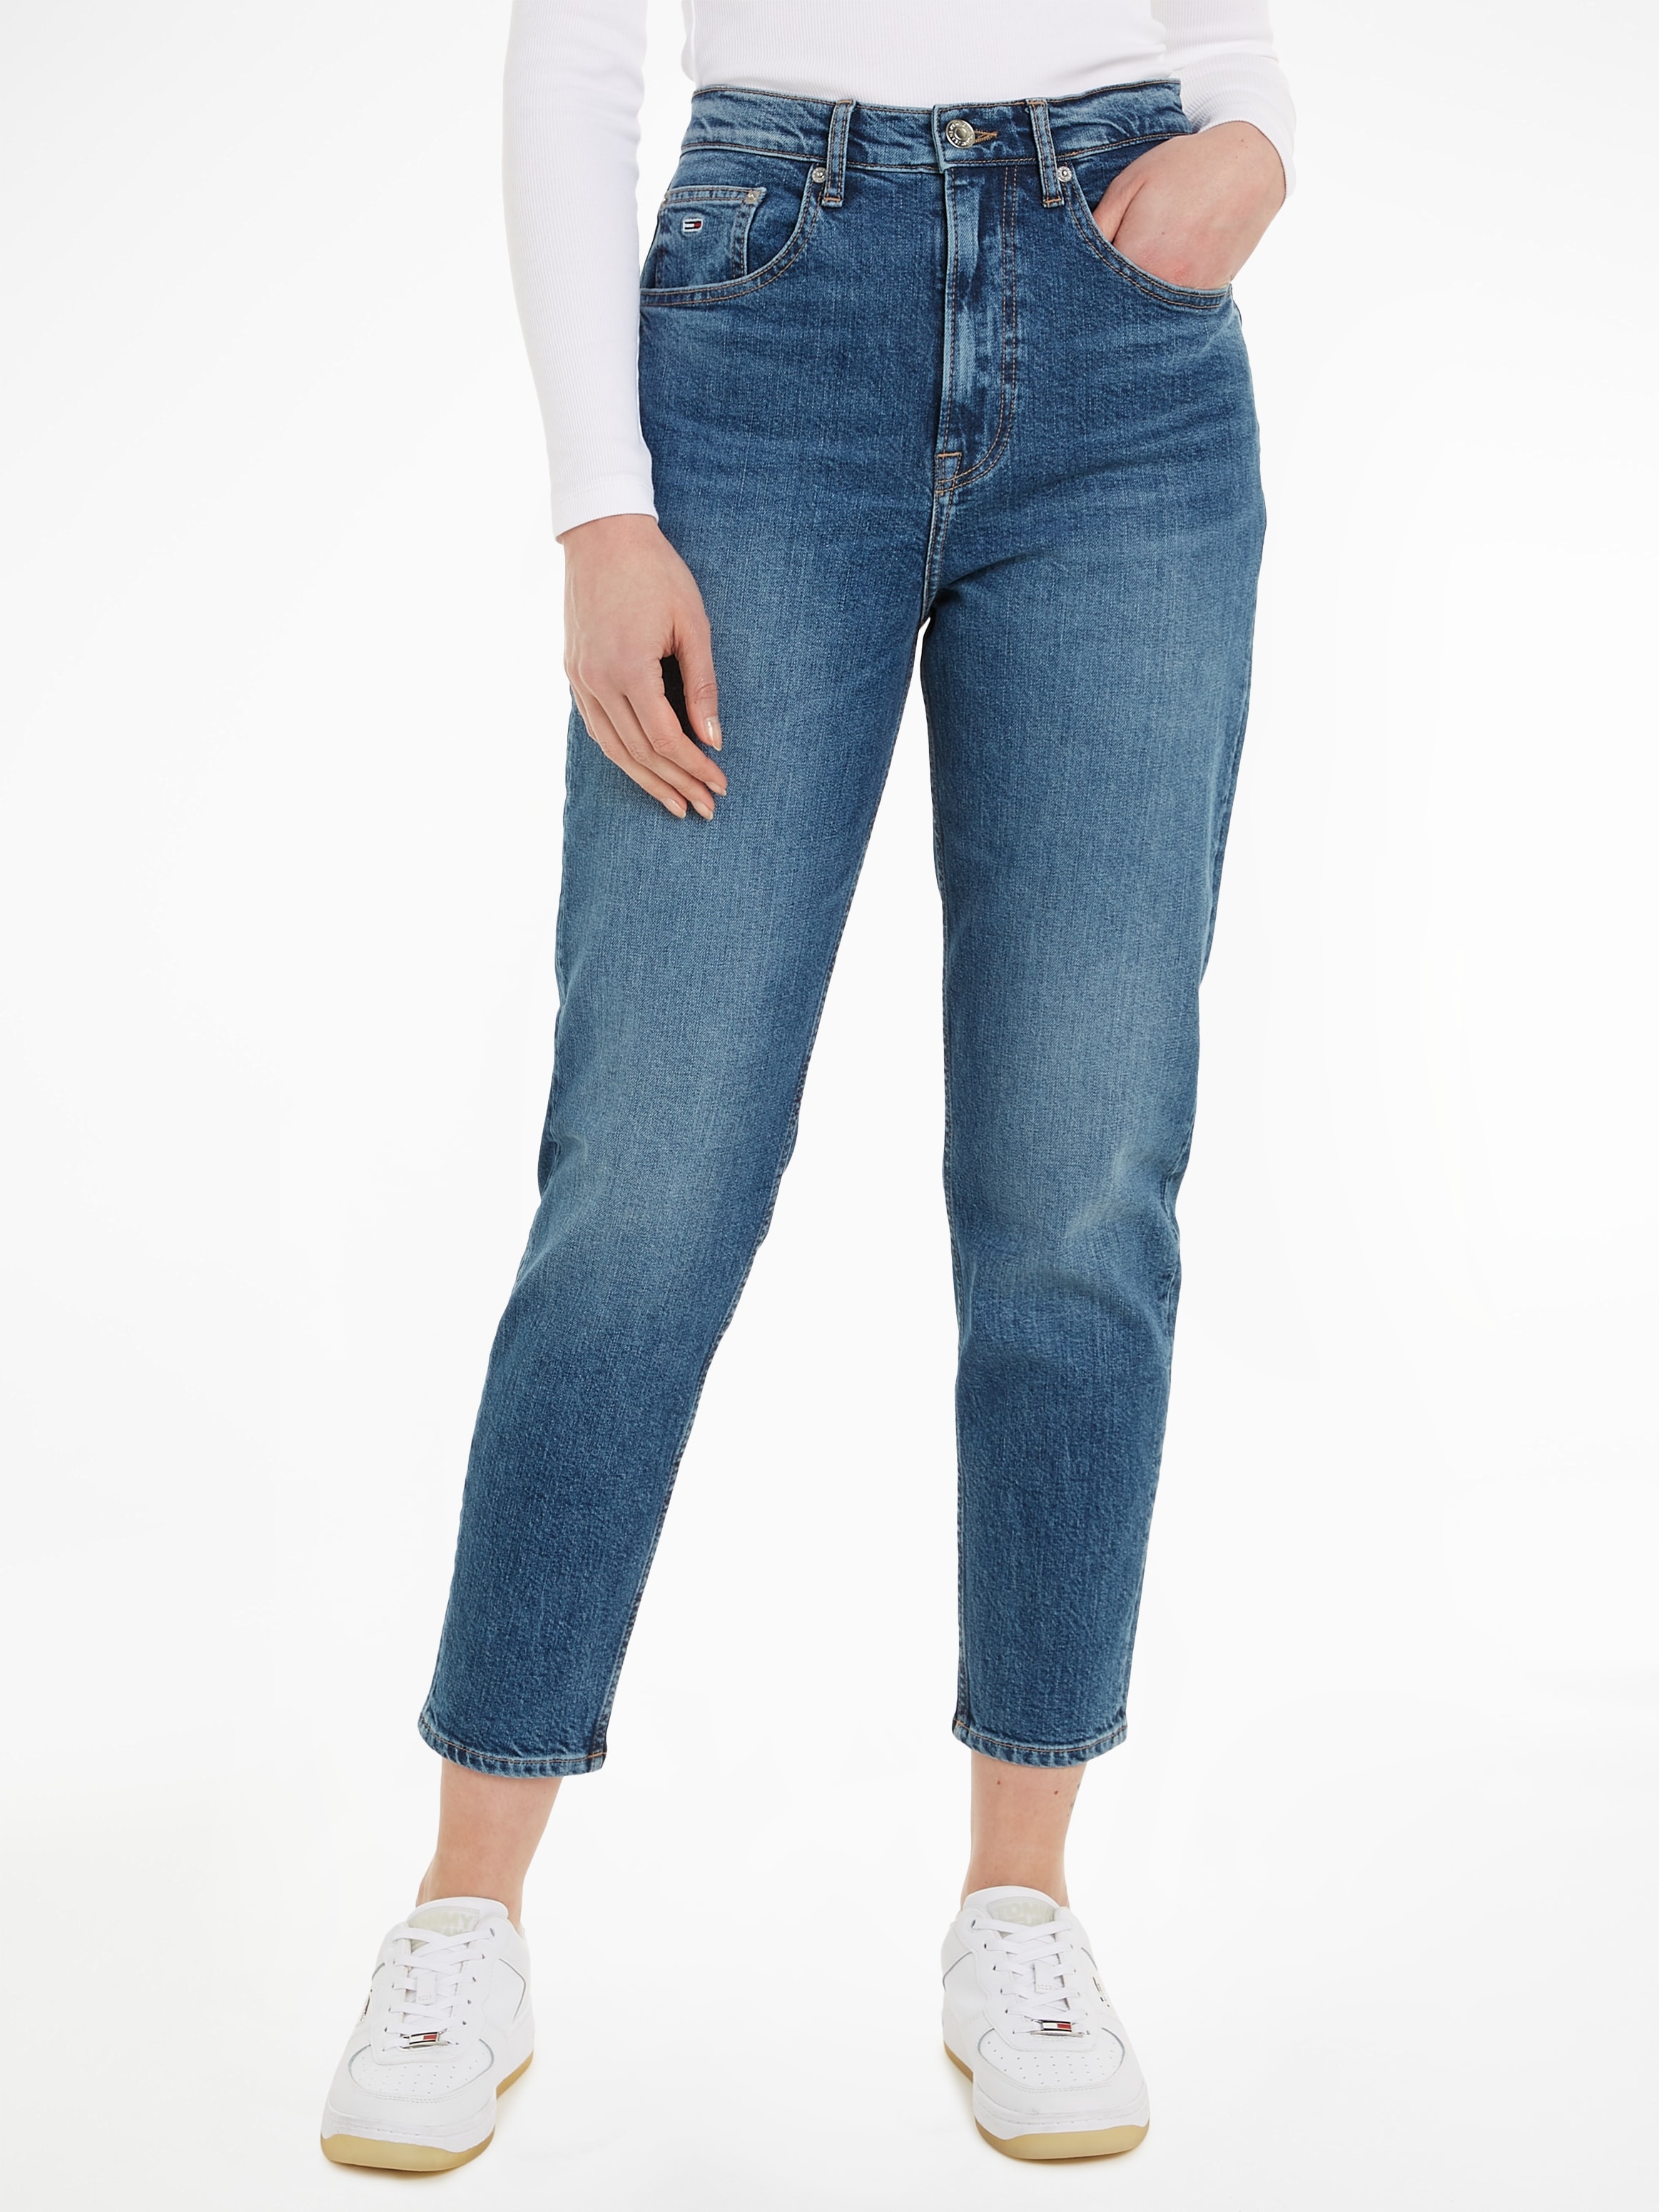 UH Logopatch Jeans Mom-Jeans ♕ JEAN bei TPR mit »MOM DG«, Tommy